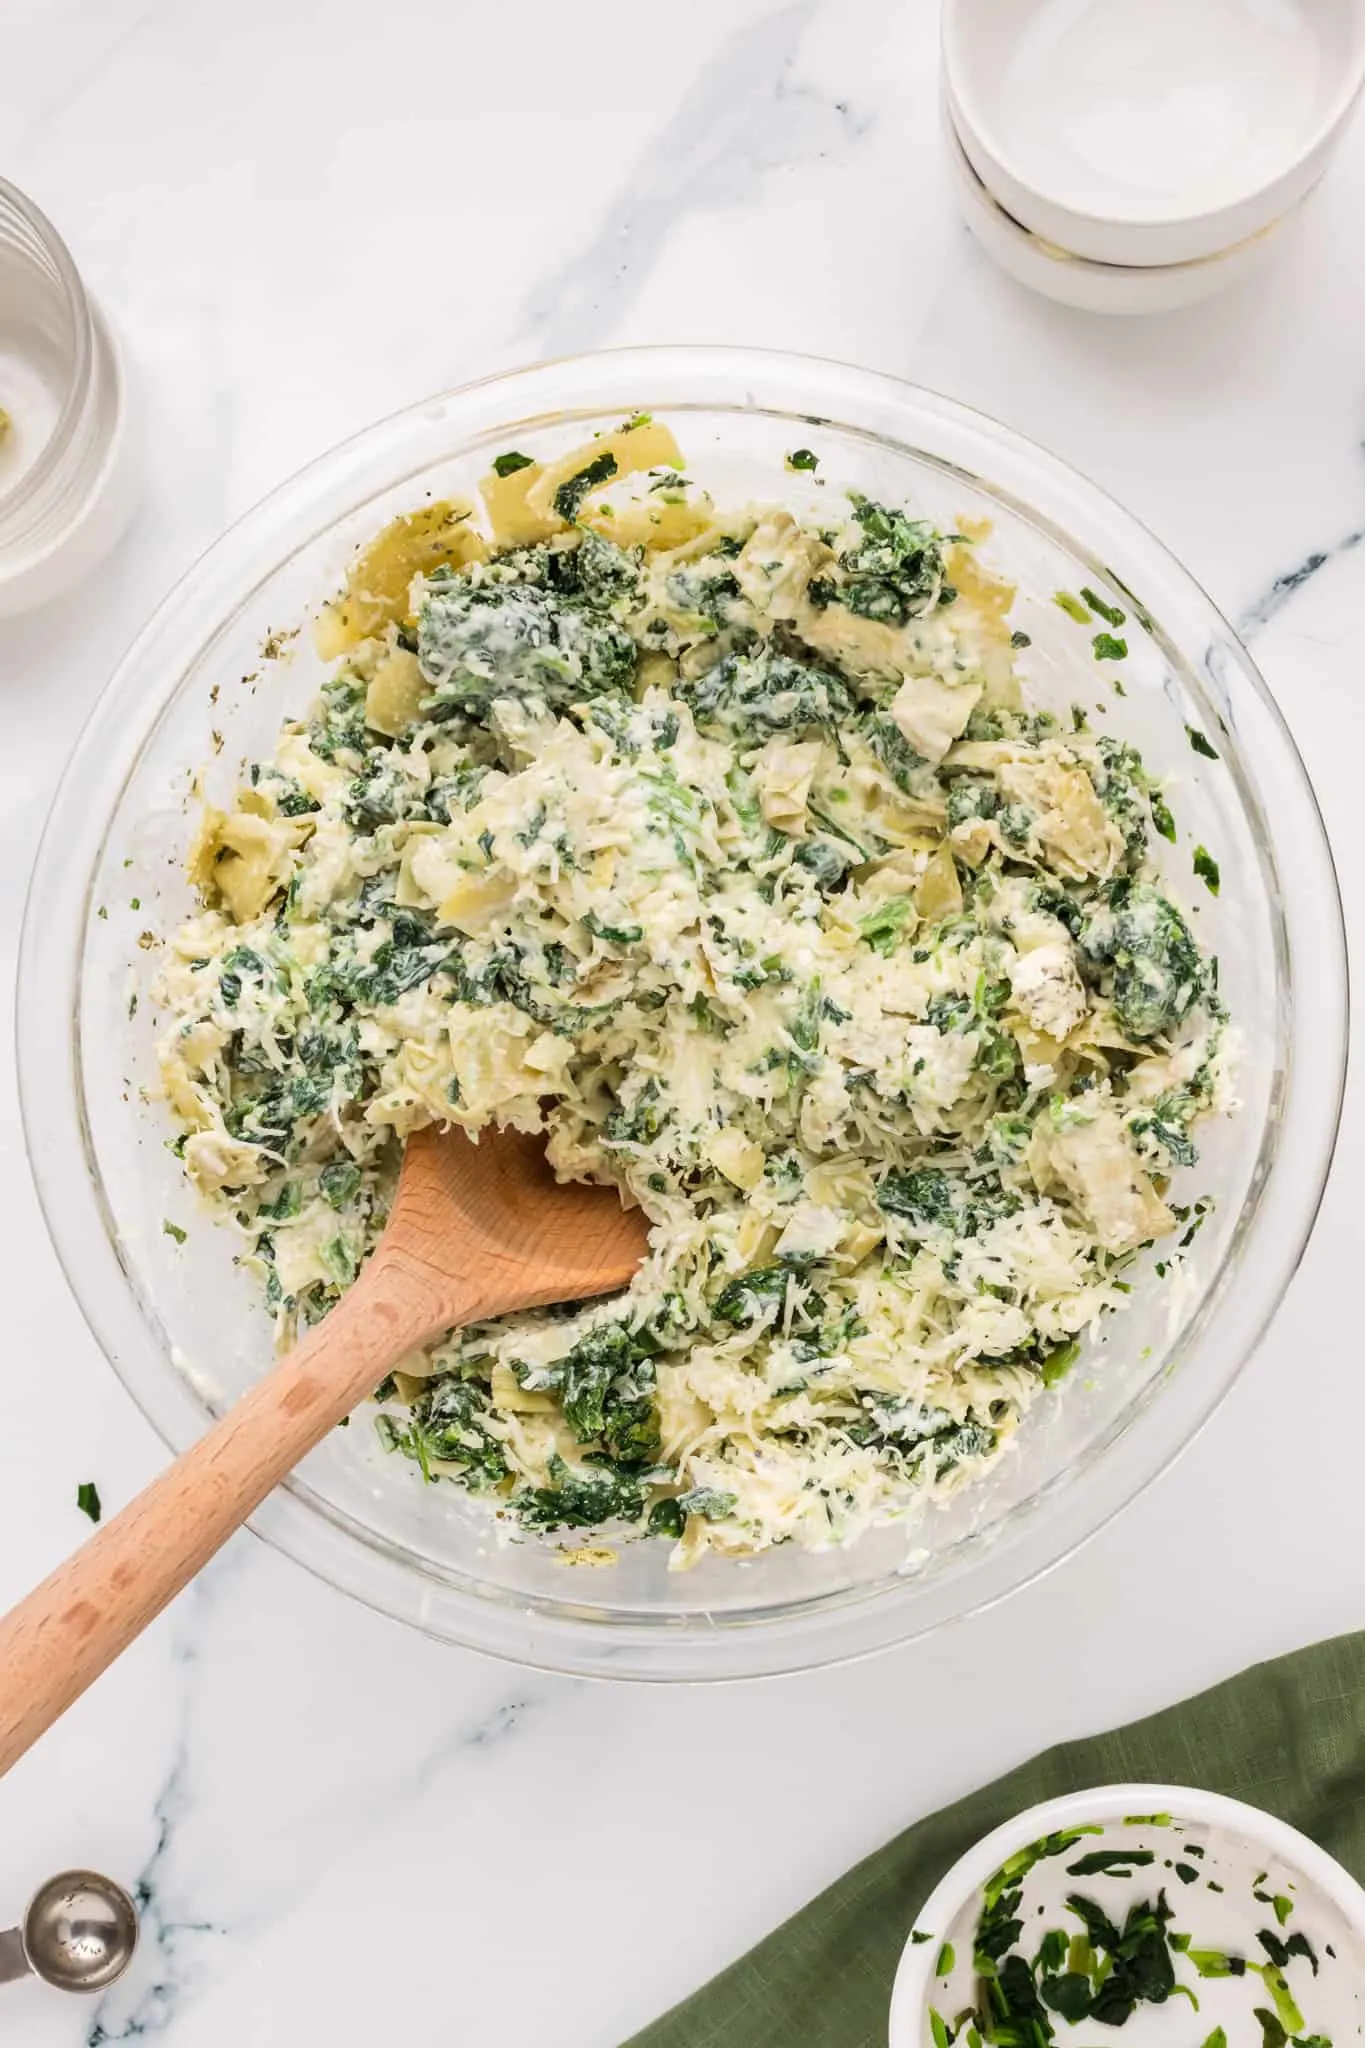 cream cheese, spinach and artichoke mixture in a mixing bowl